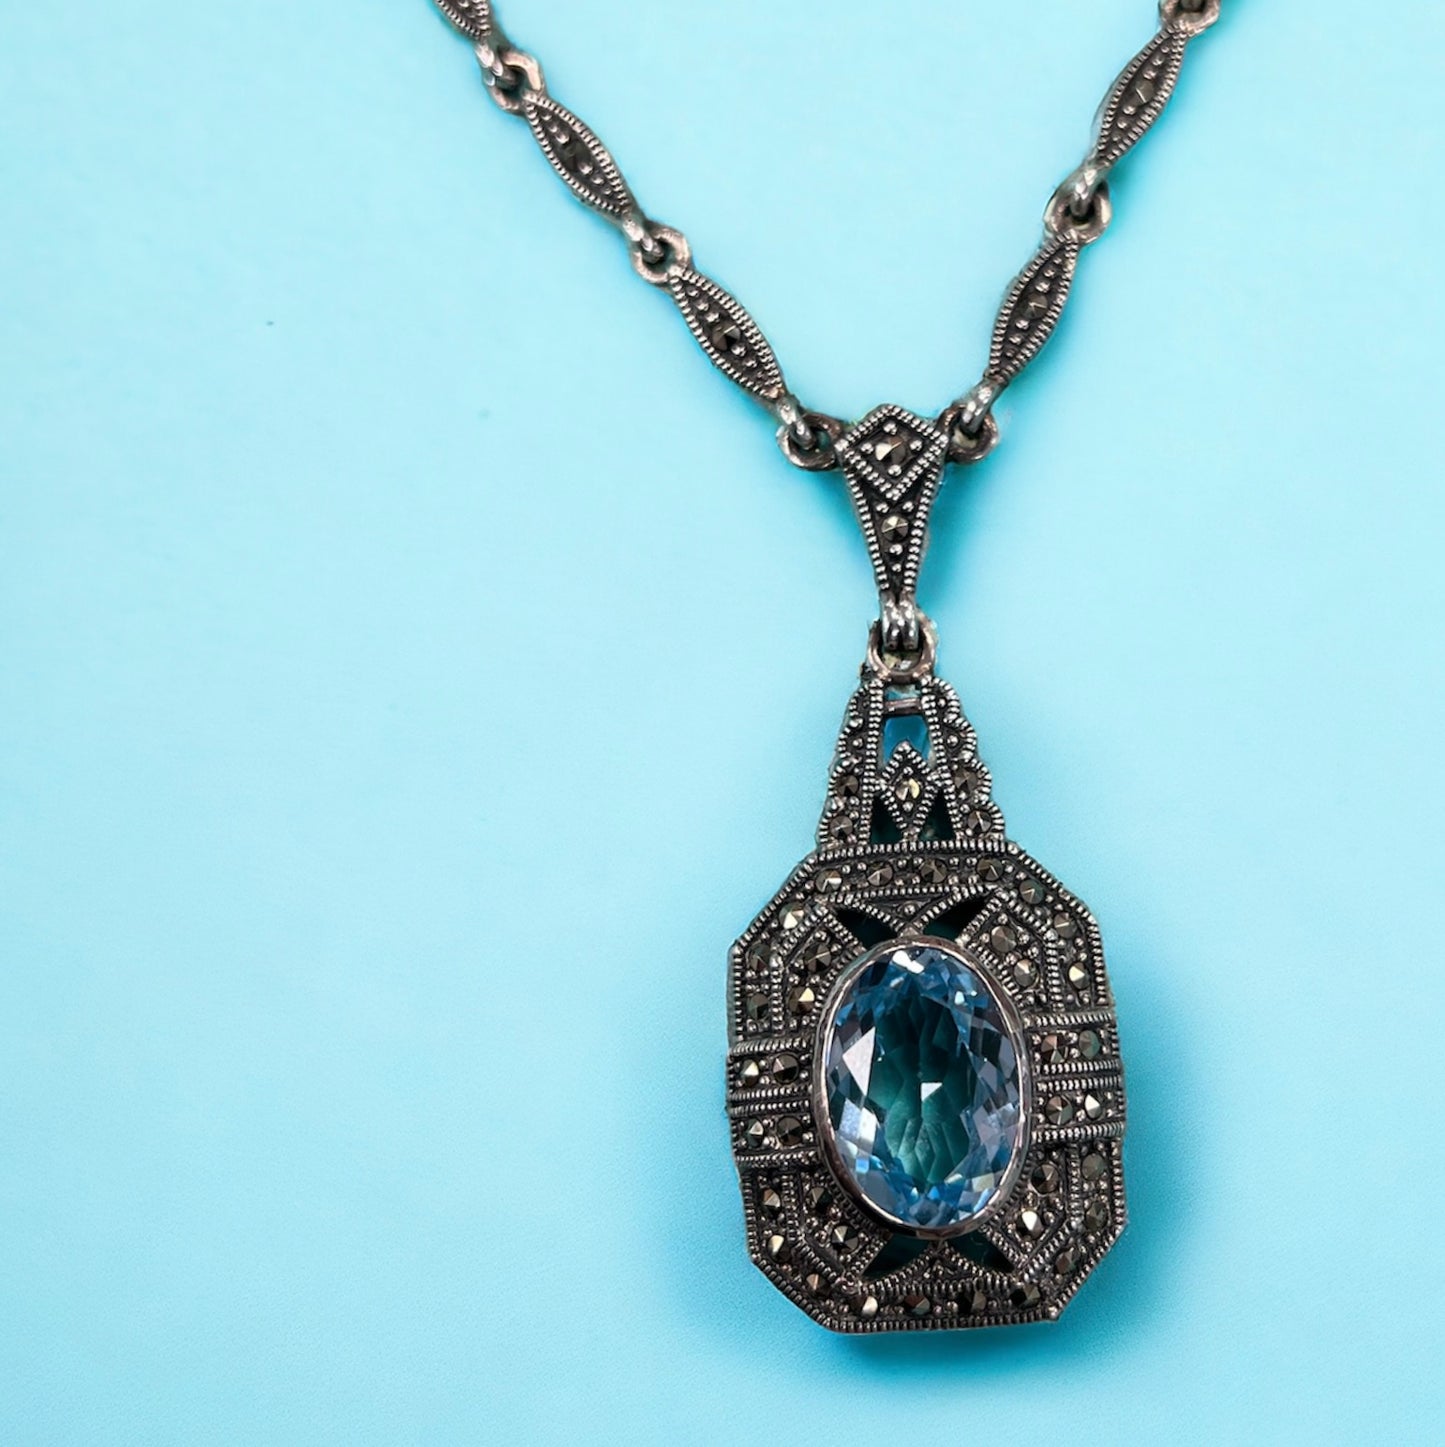 Art Deco Reproduction Sterling Silver Blue Topaz and Marcasite Necklace